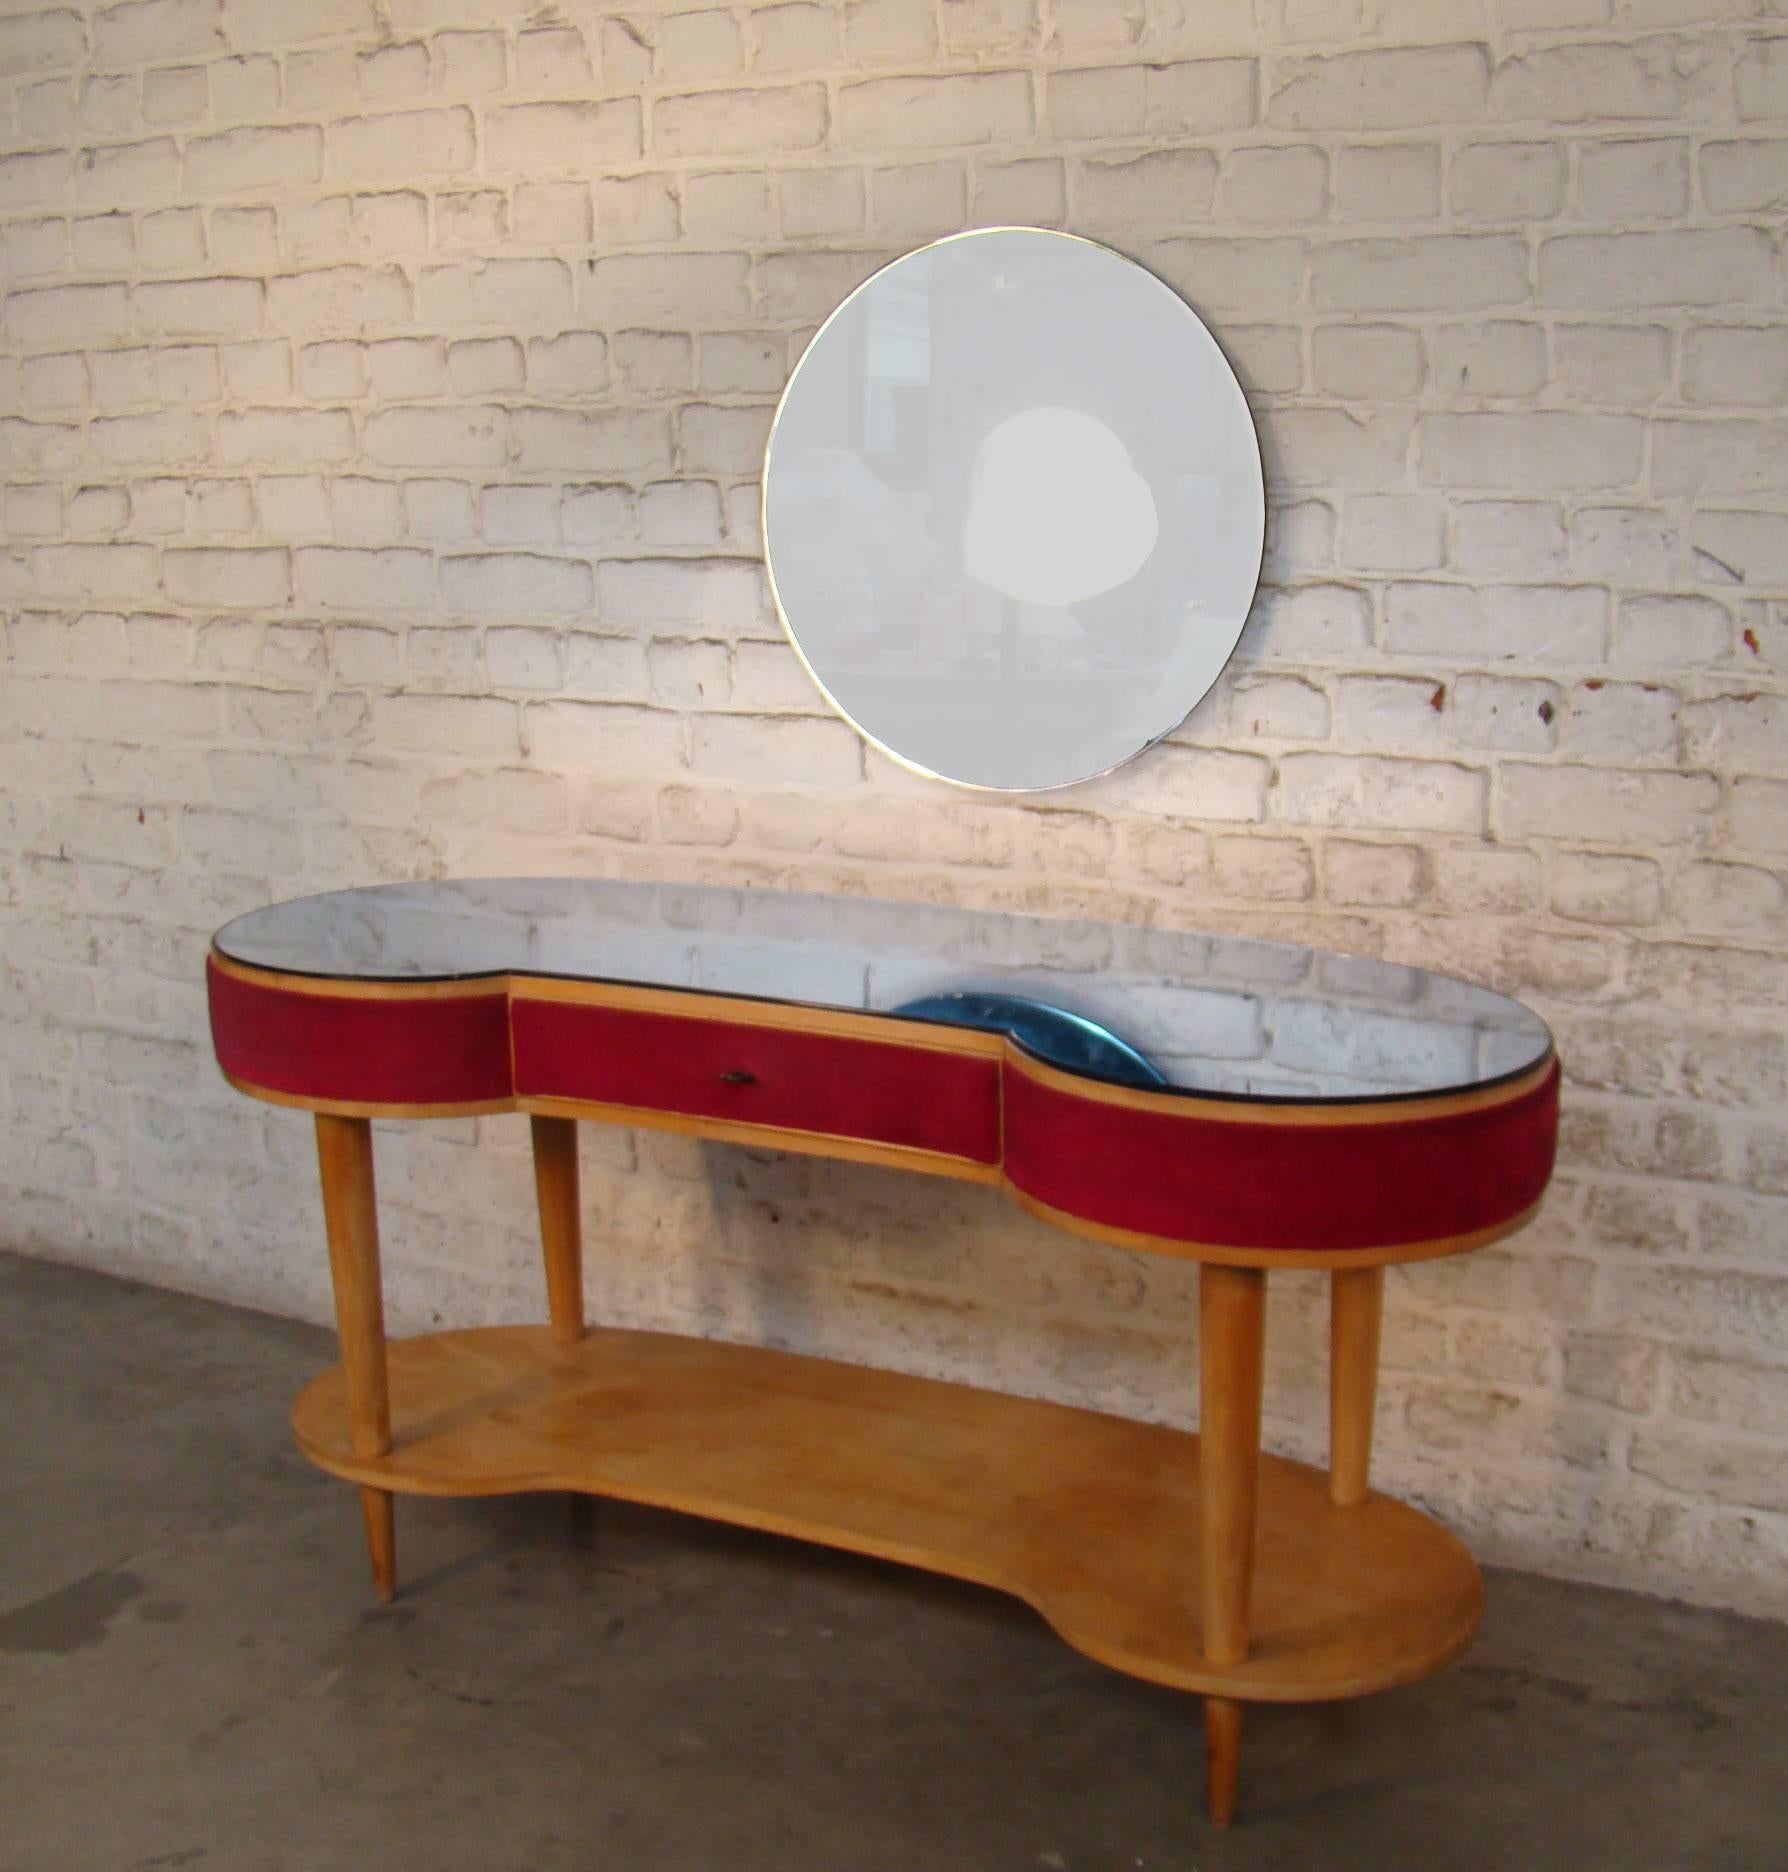 Dressing table and its stool in veneer cheerywood and blue-toned glass, Italy, circa 1960-1970.